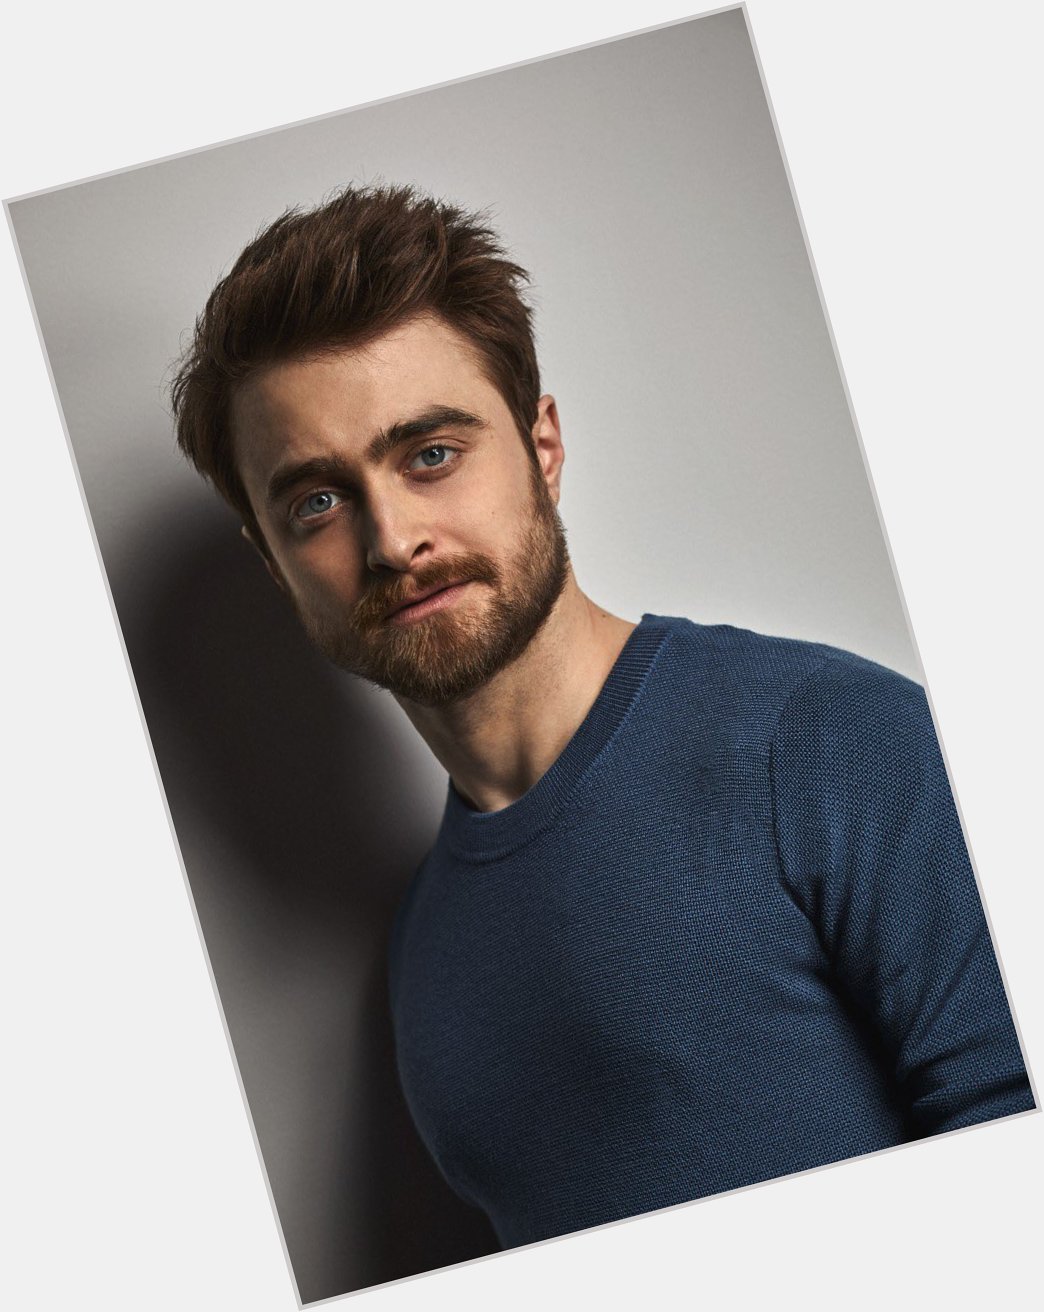  Happy birthday to Daniel Radcliffe  who portrayed Harry Potter himself in the films! 